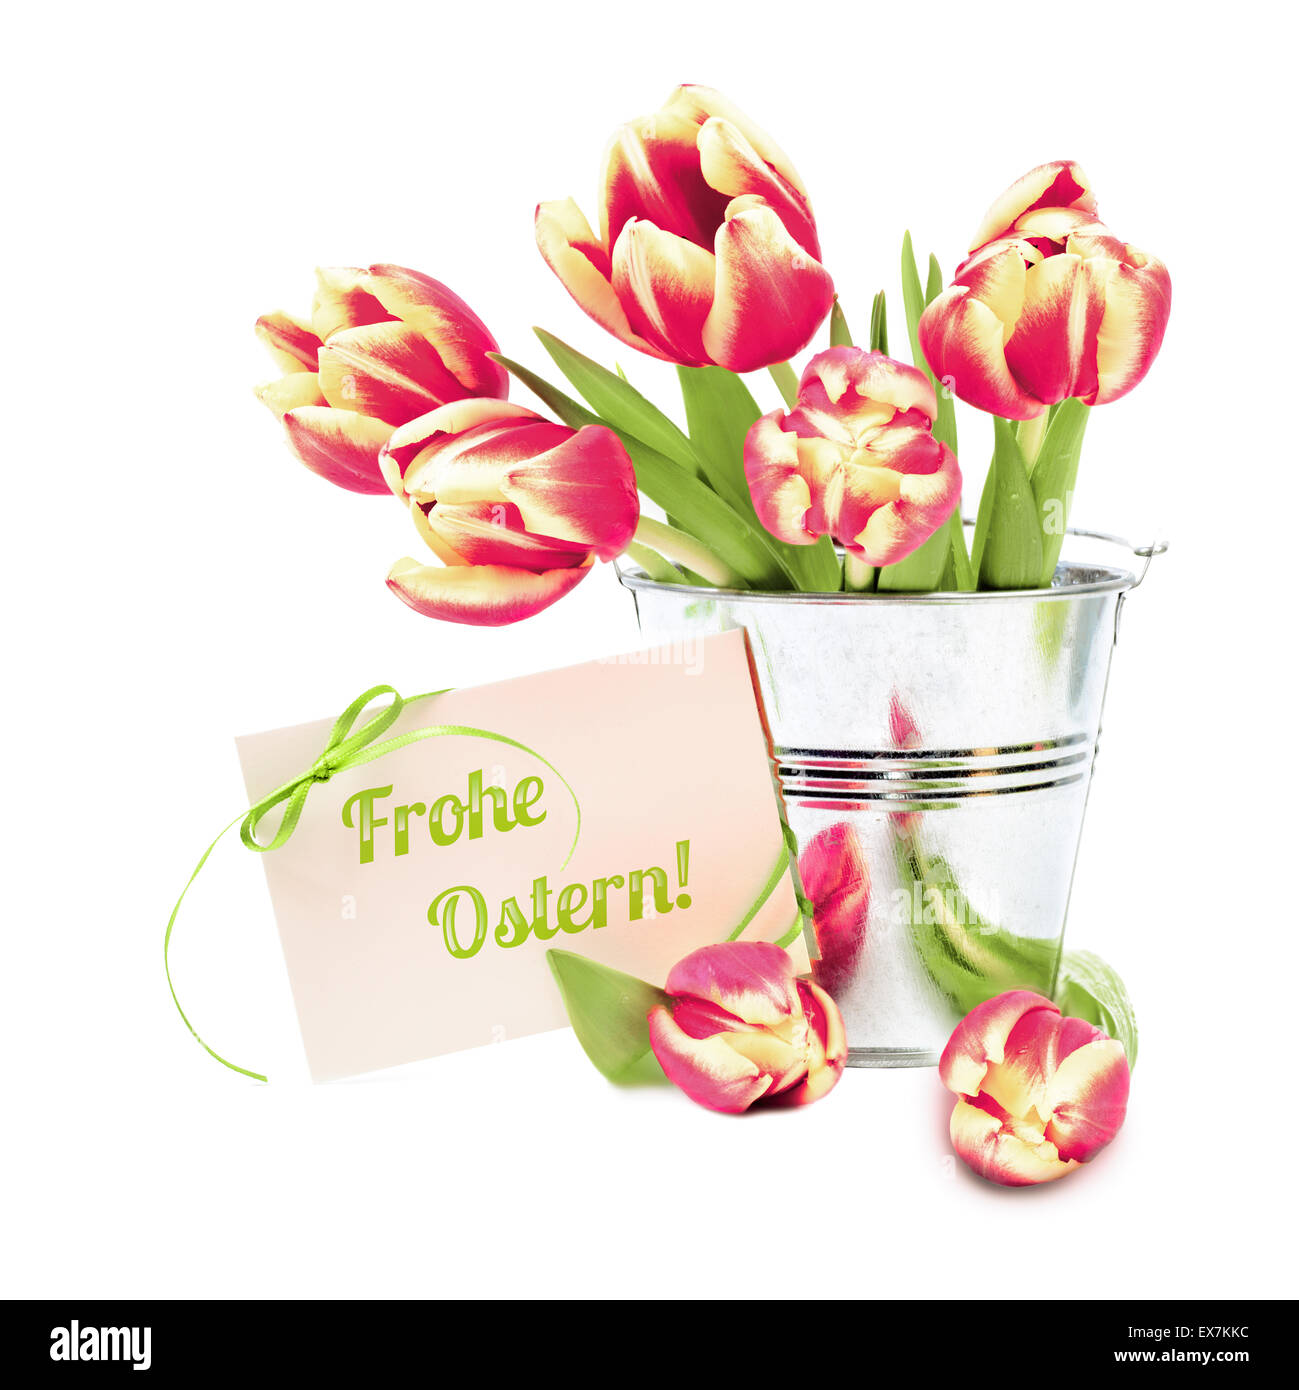 Red stripy tulips in shiny tin backet and greeting card 'Frohe Ostern!' ('Happy Easter' in German) on white background Stock Photo